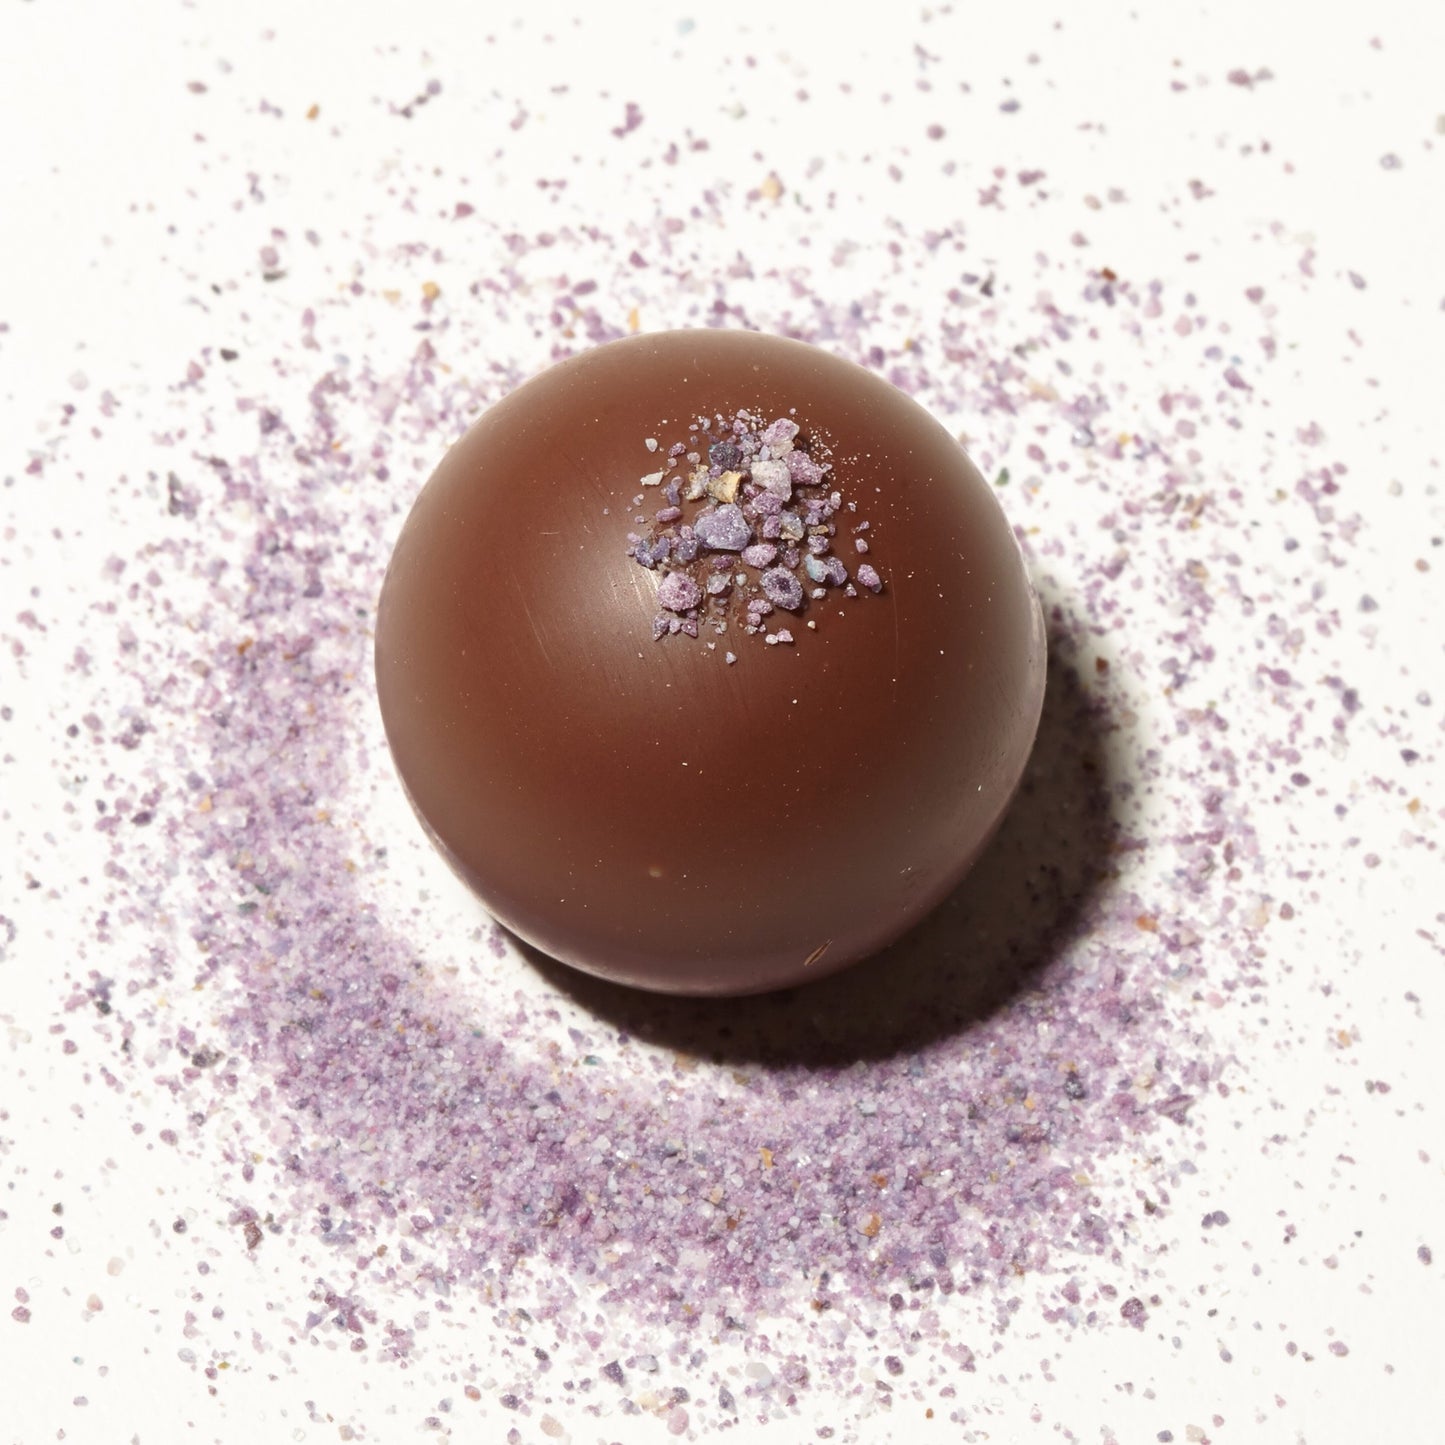 Close-up view of a Vosges Violet truffle coated in milk chocolate and topped with purple candied violet flowers on a white background.